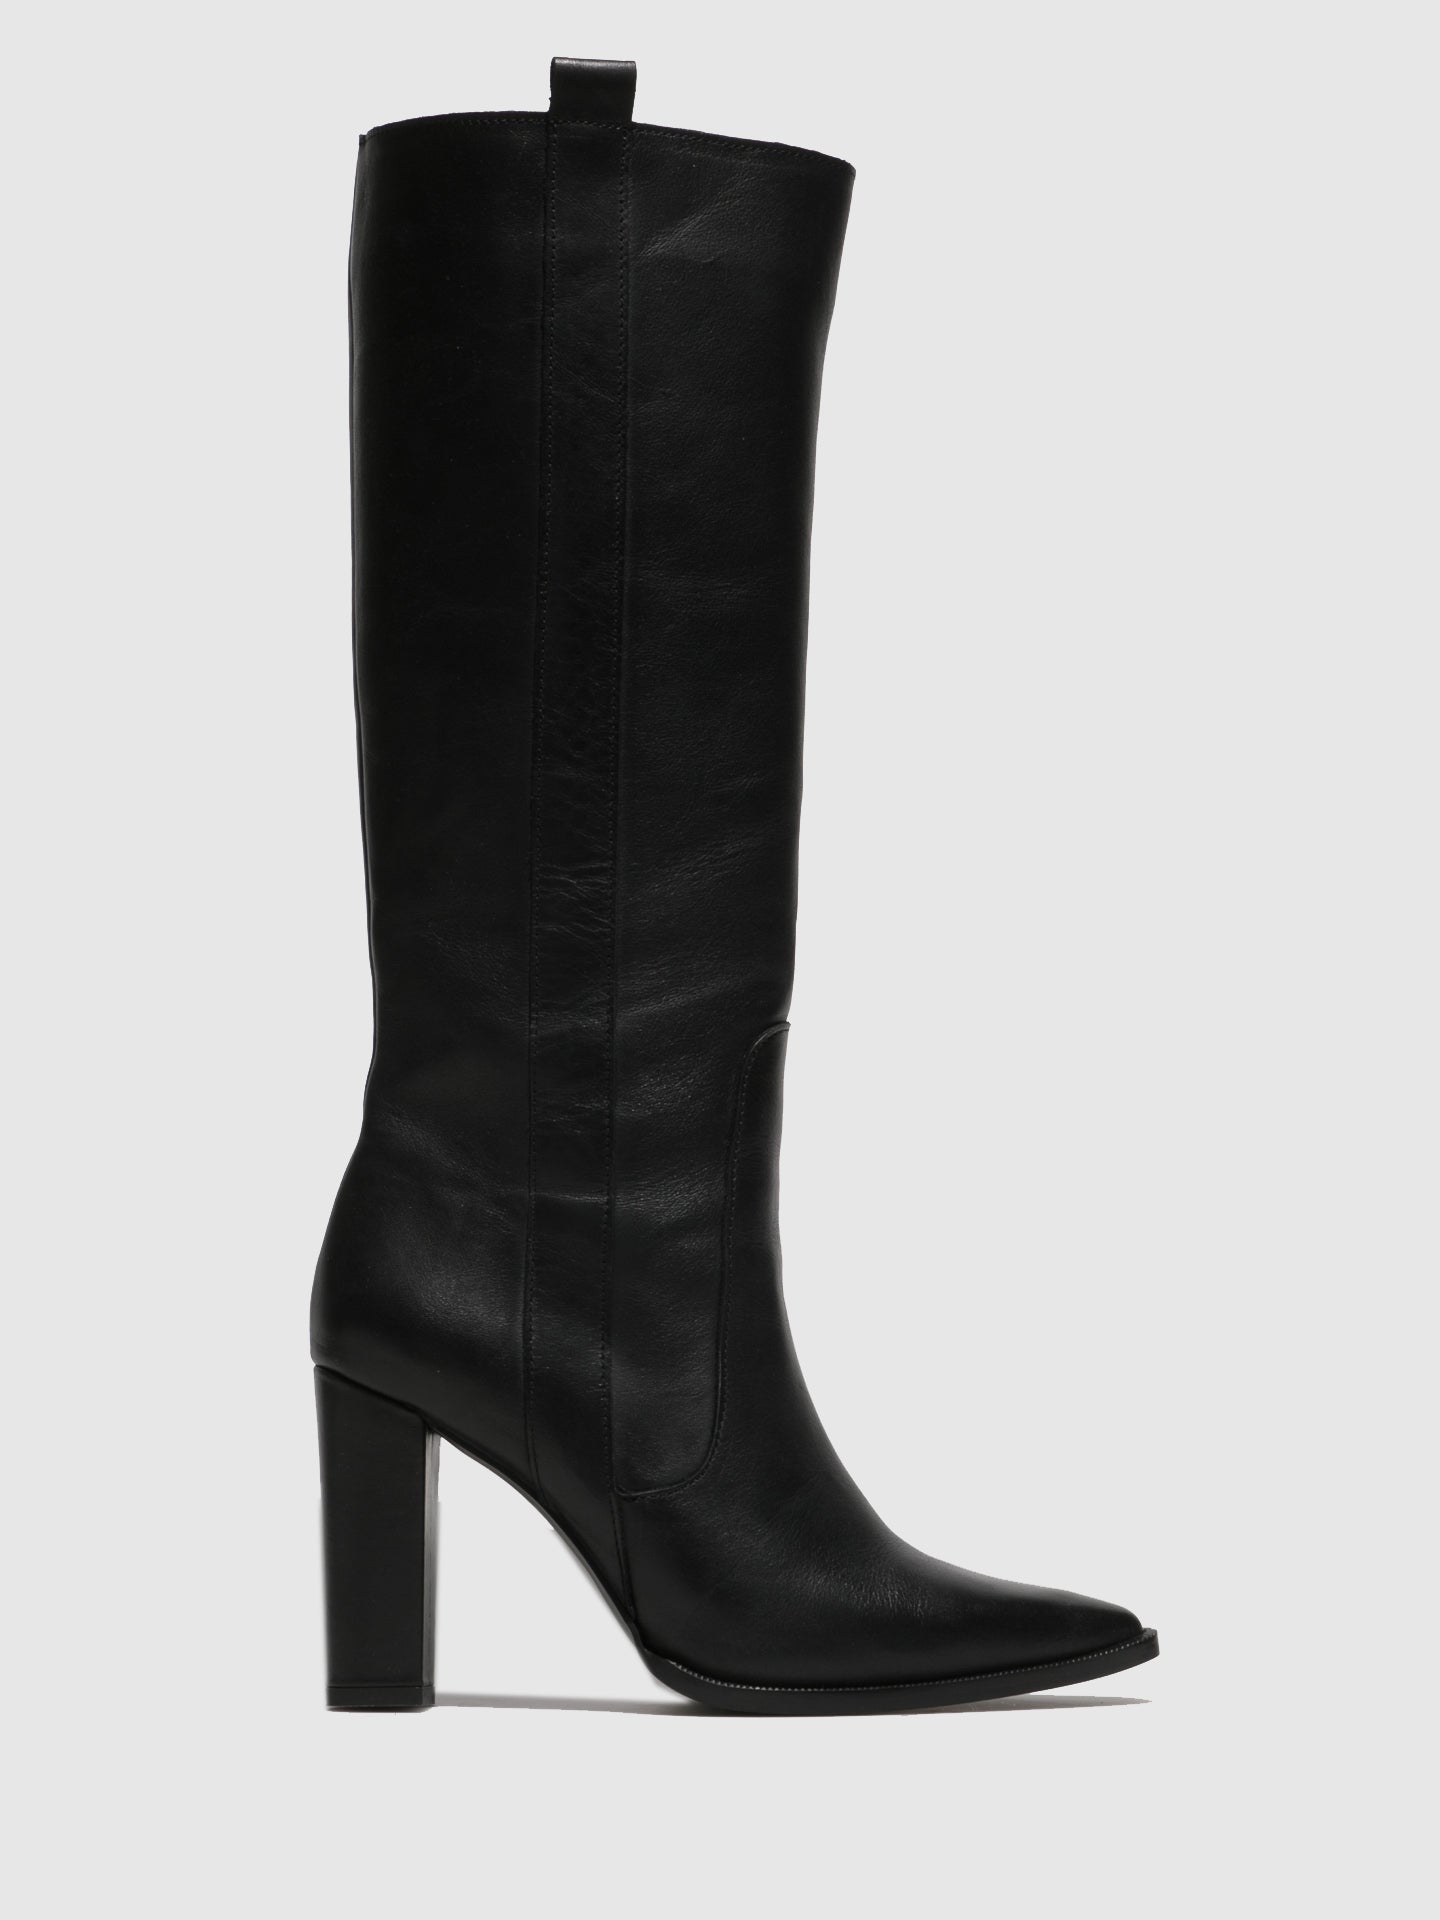 Foreva Black Pointed Toe Boots